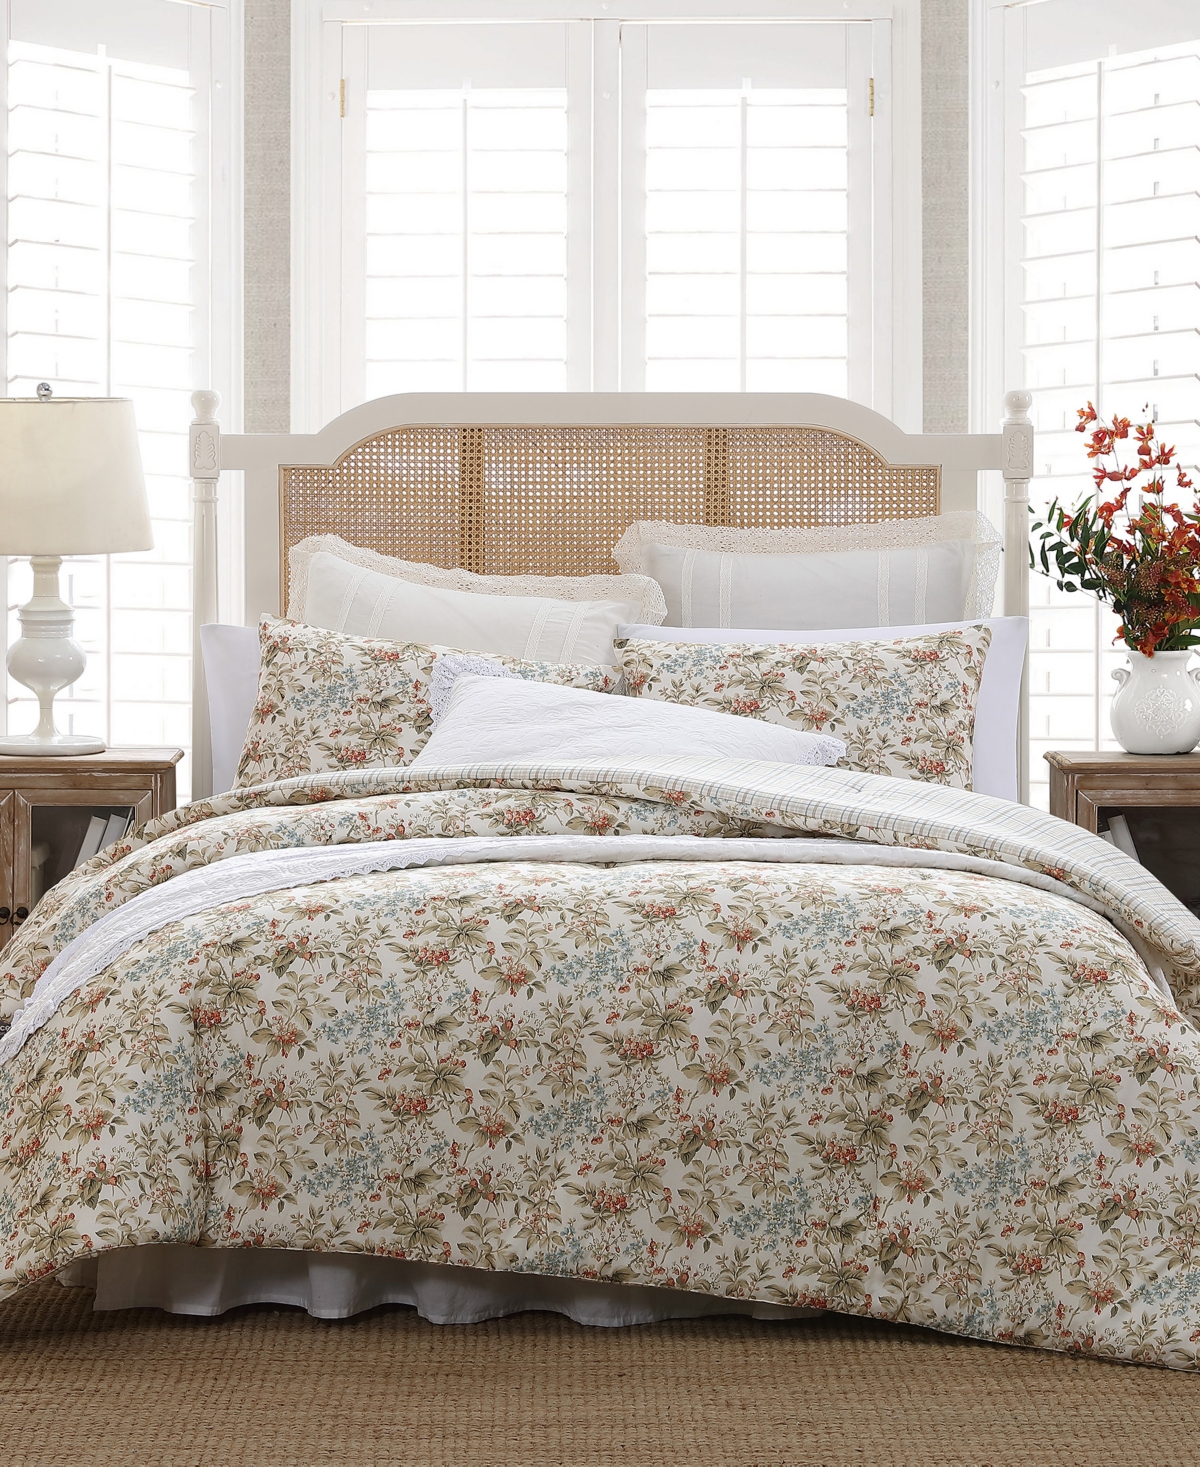 Laura Ashley Bramble Floral Cotton Reversible 3-piece Comforter Set, King In Persimmon,wheat